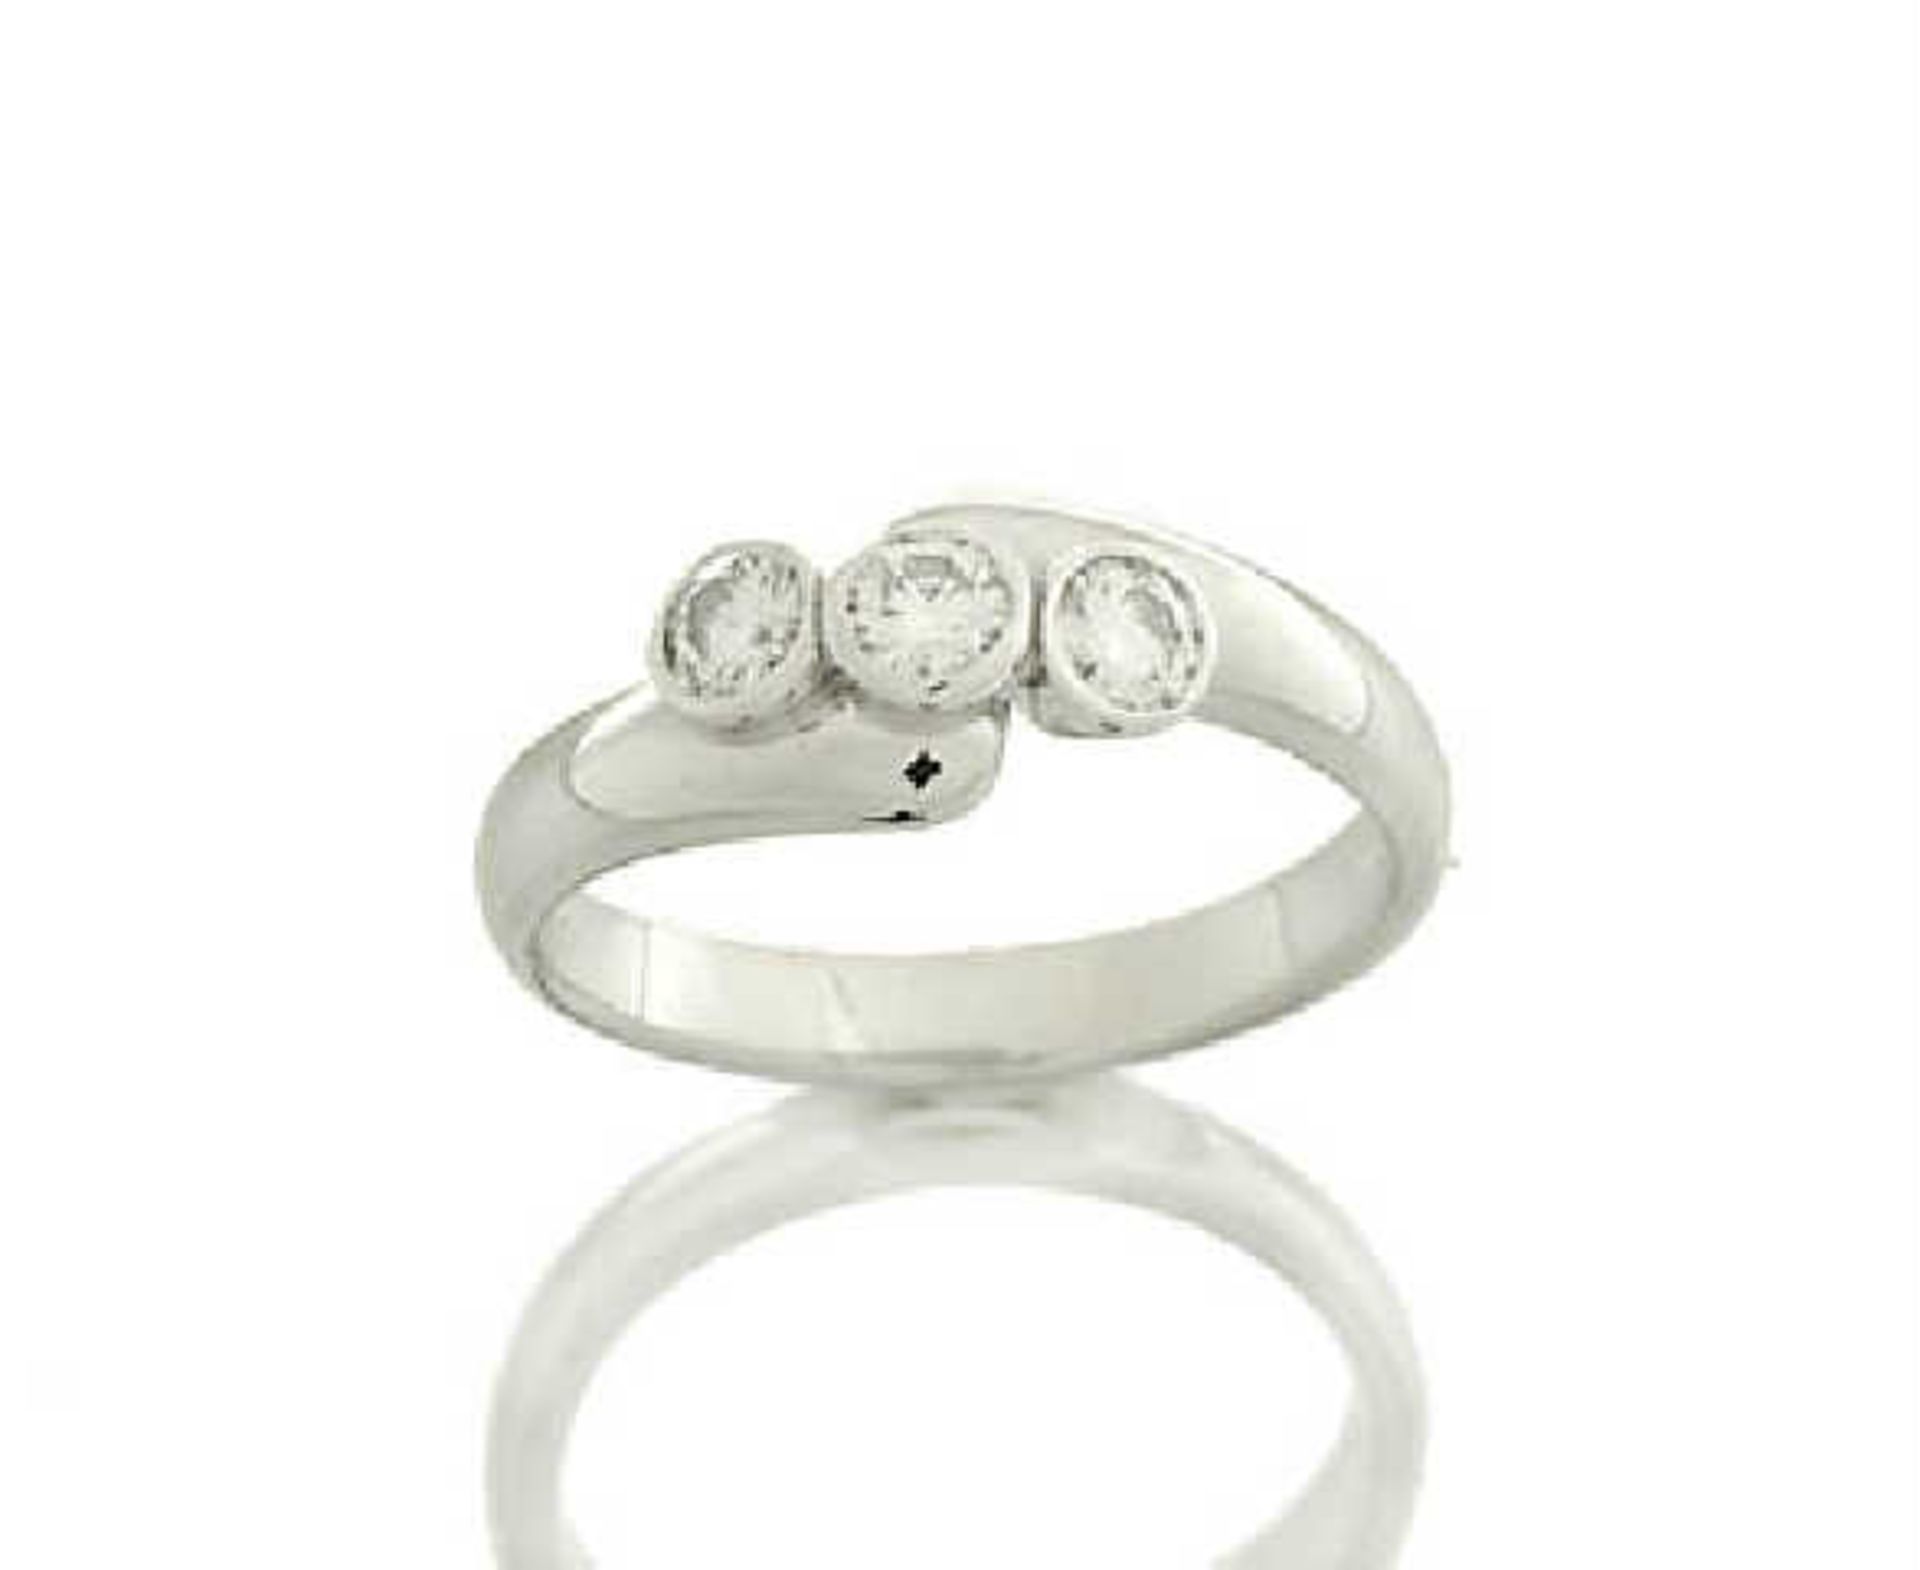 18CT WHITE GOLD THREE STONE RING, RUB-OVER SET WITH DIAMONDS WEIGHING +0.42CT - Image 2 of 2